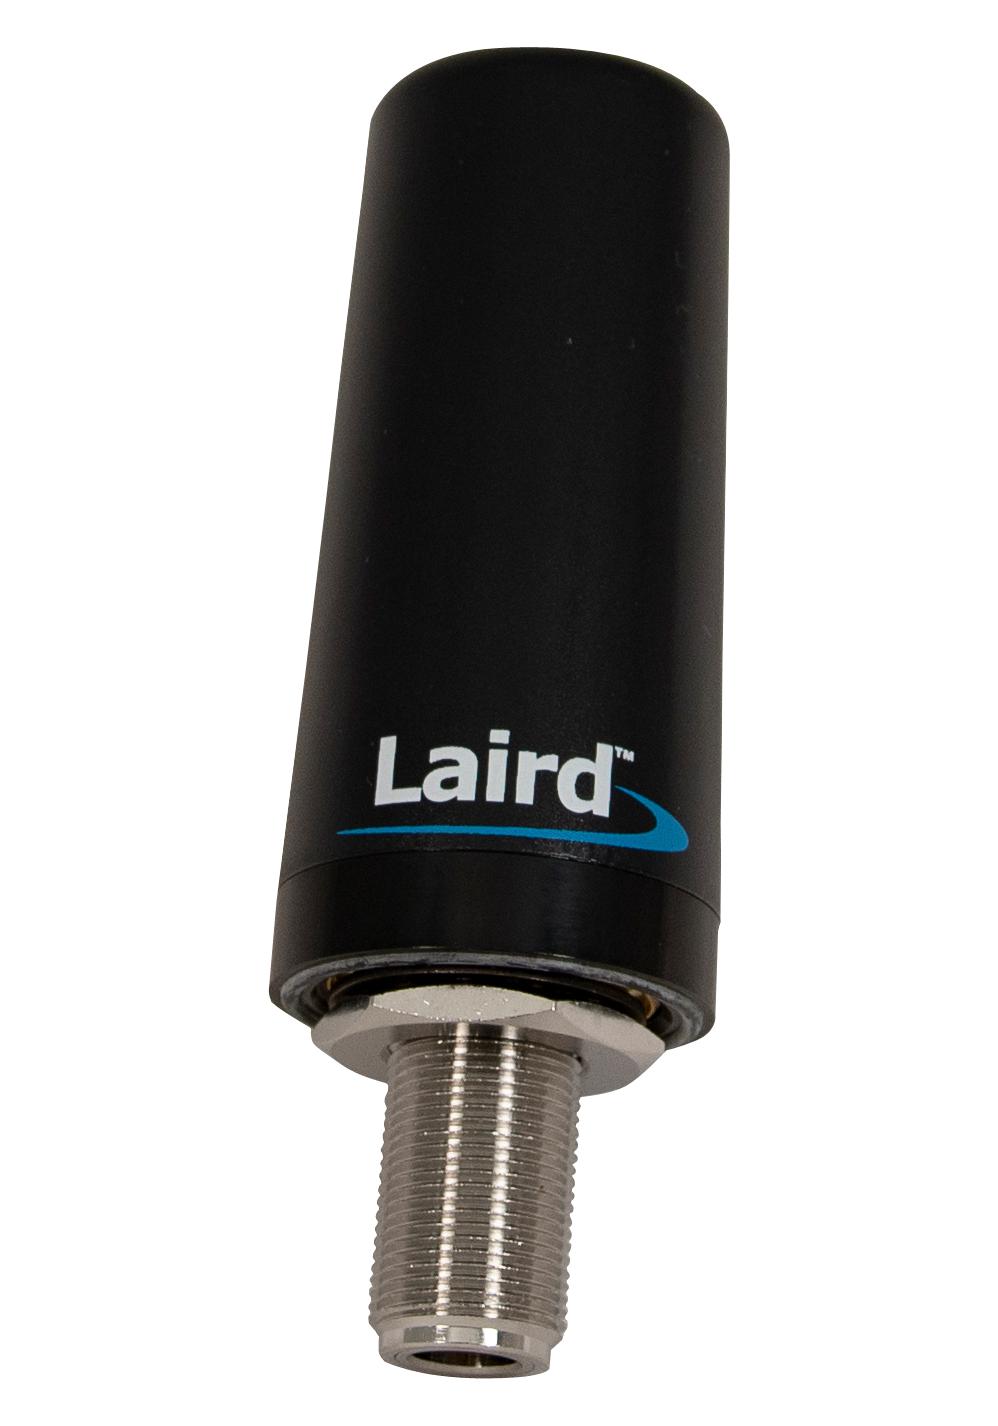 TRA6927M3PW-001 DOME ANTENNA, 1.71-2.7GHZ, 4.6DBI LAIRD CONNECTIVITY